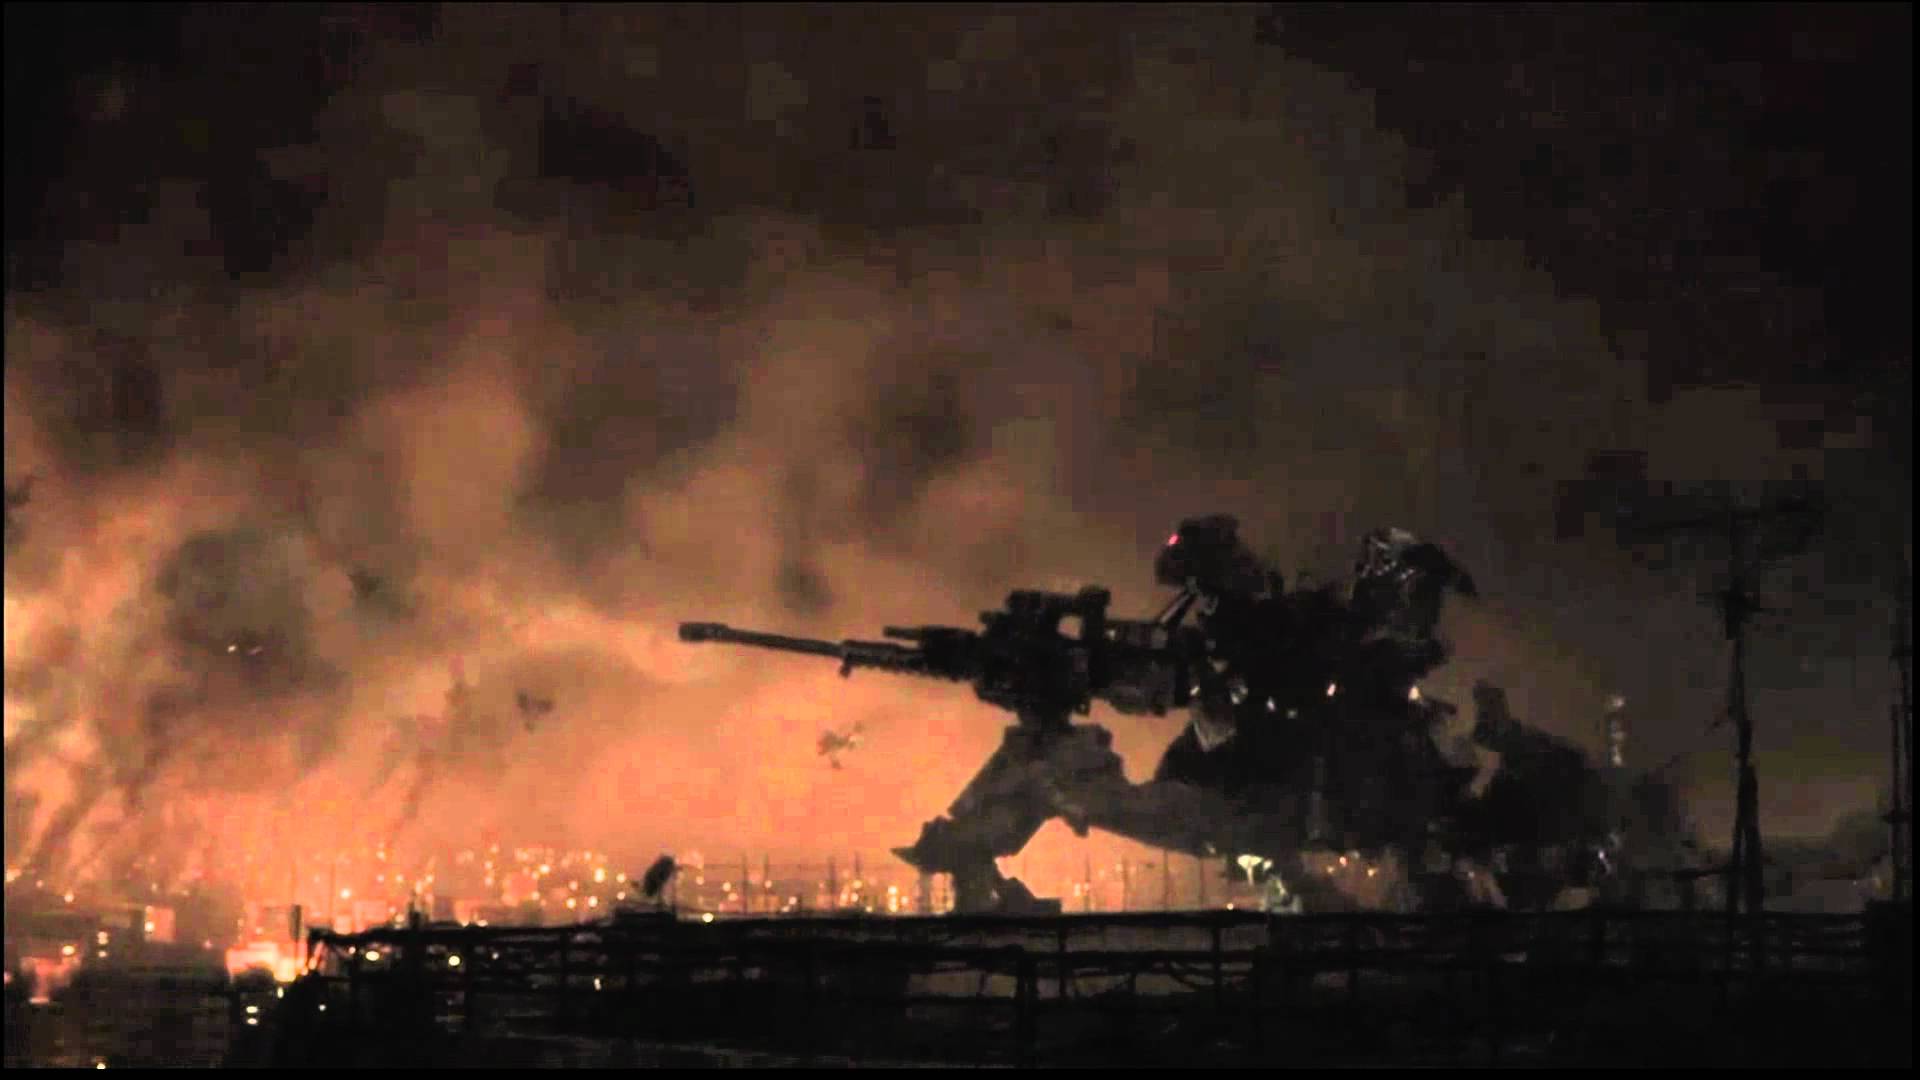 Armored Core V HD wallpapers, Desktop wallpaper - most viewed